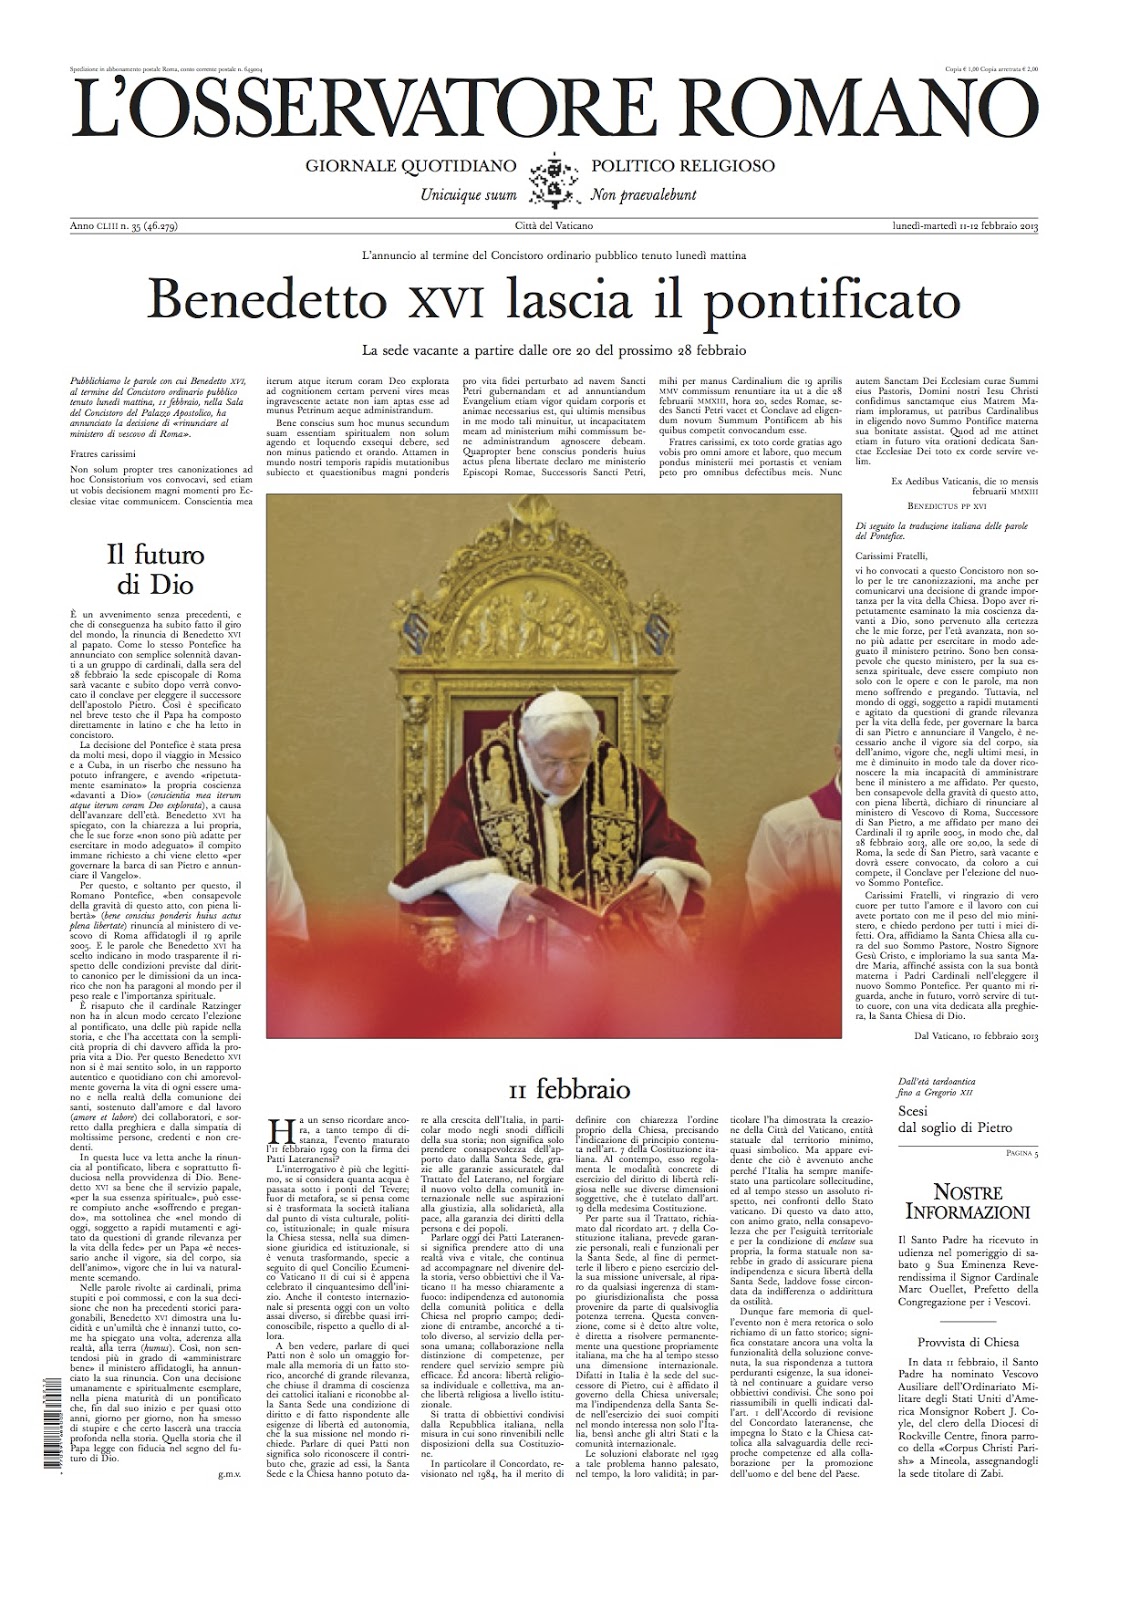 Whispers in the Loggia: The Pope's Paper: 